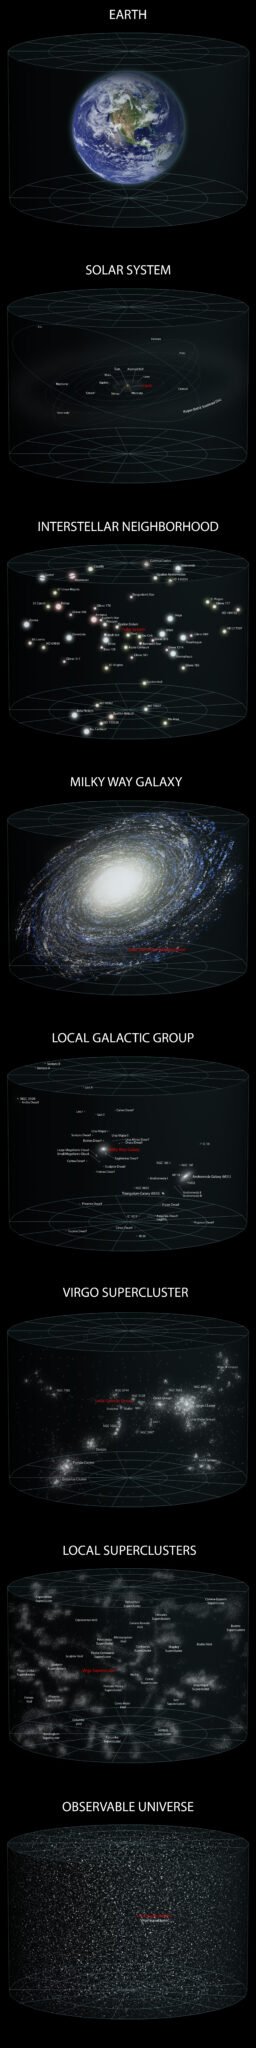 Earths Location in the Universe VERTICAL JPEG 1